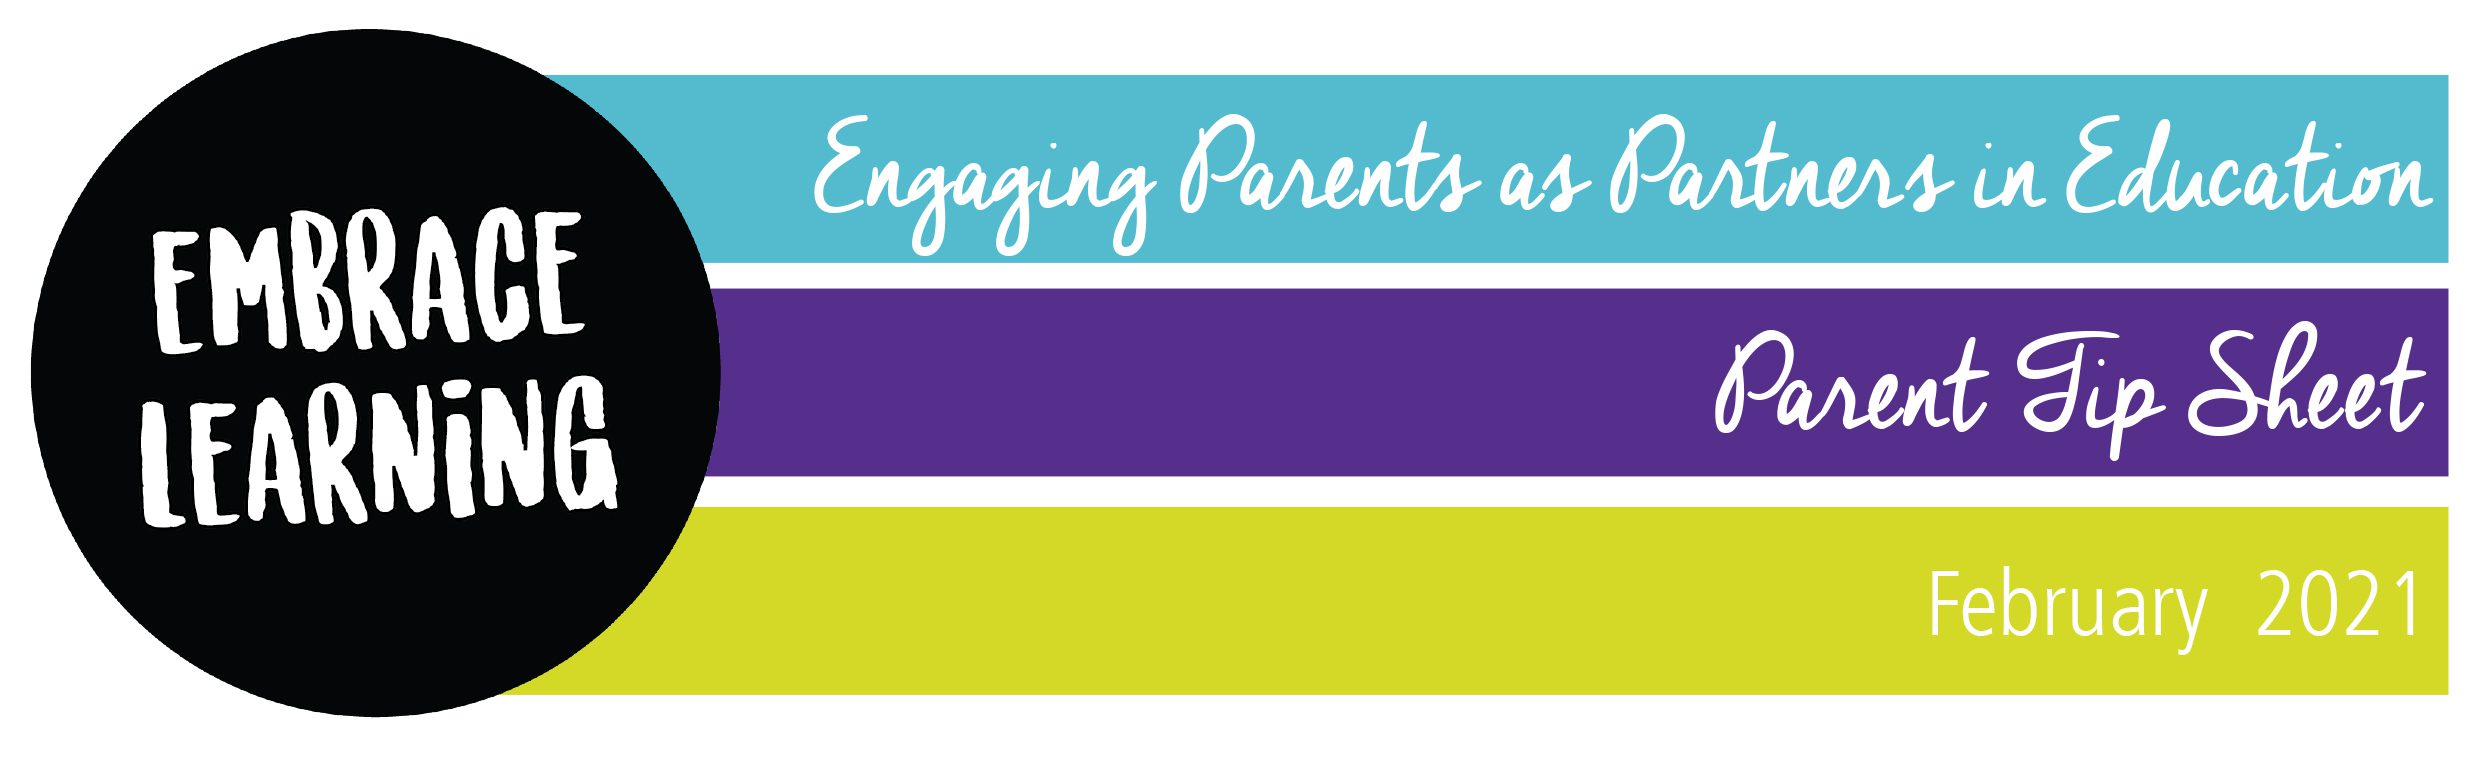 Parent Engagement banner that says Embrace Learning, Engaging Parents as Partners in Education, Parent Tip Sheet, February 2021